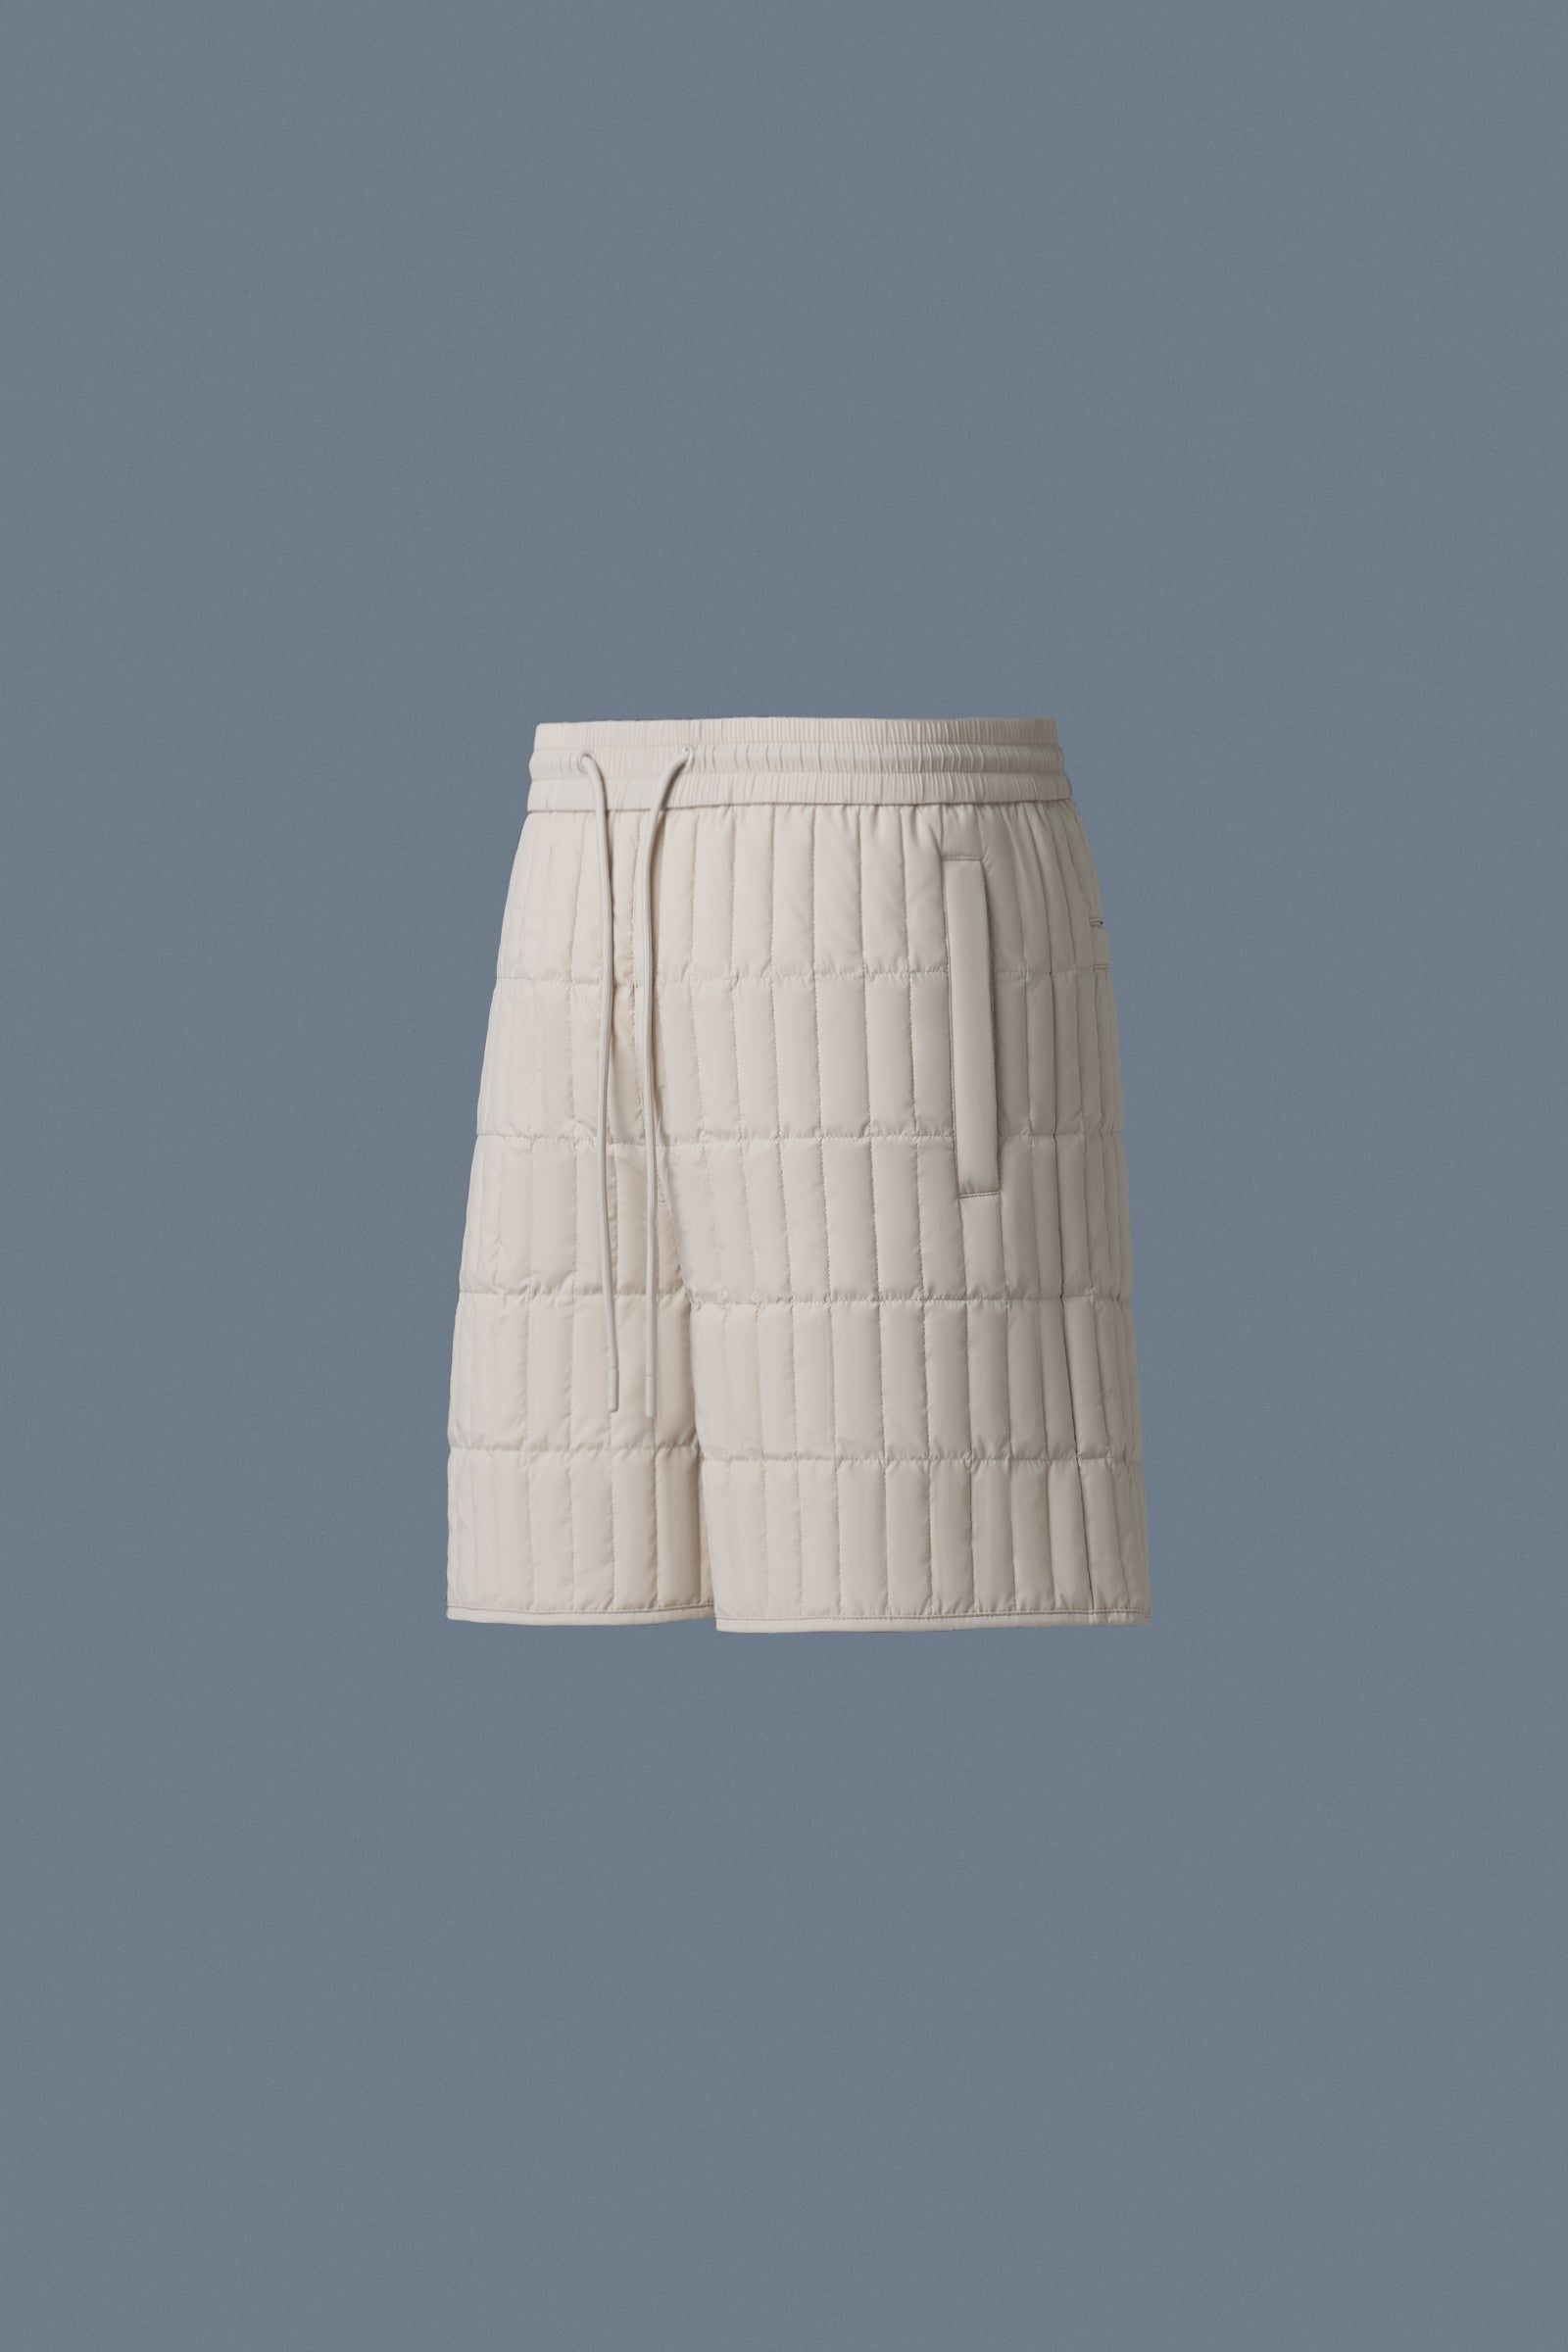 SEBASTIAN Vertical Quilted Shorts - 1